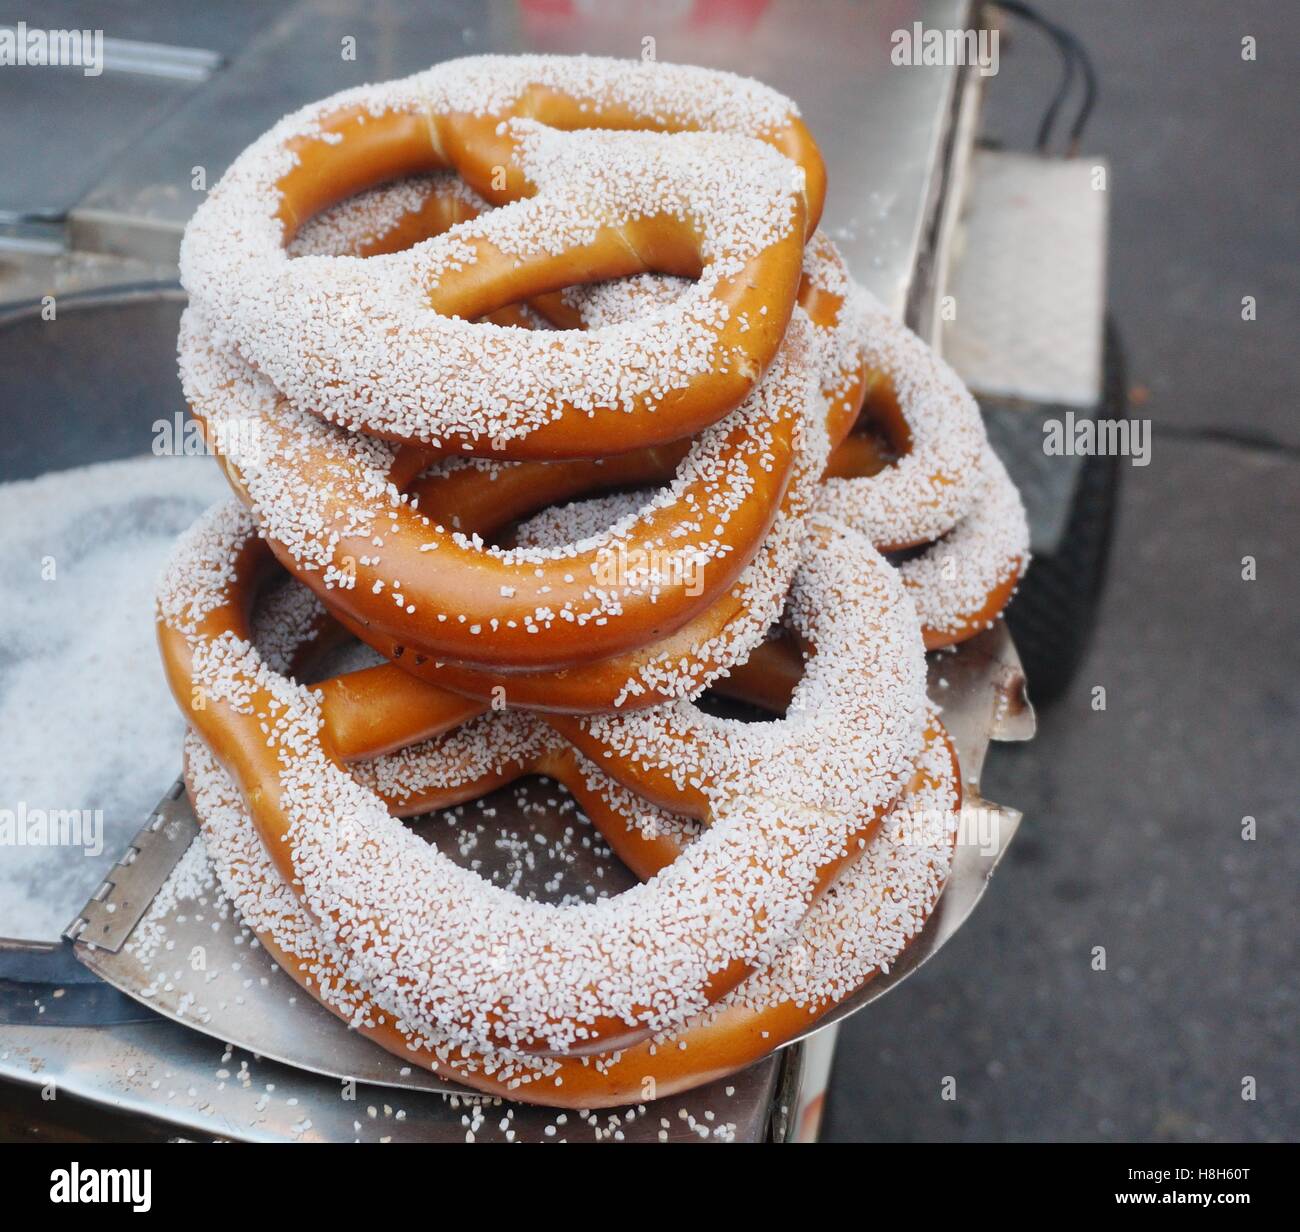 Salted pretzels sold on a street corner in New York City Stock Photo